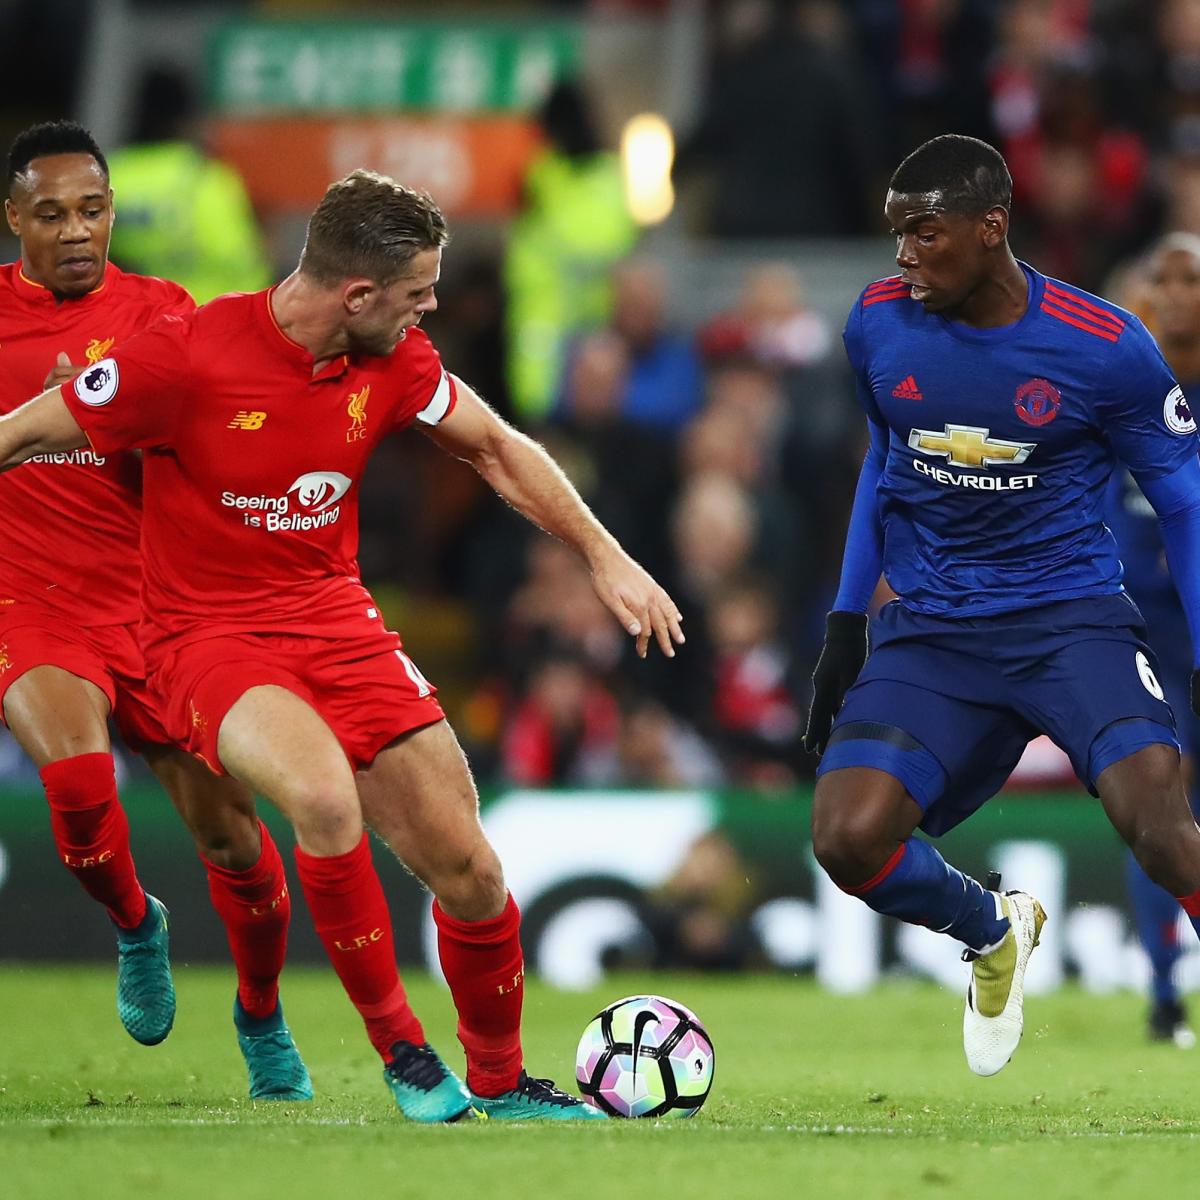 Liverpool Vs Manchester United Live Score Highlights From Premier League Game News Scores